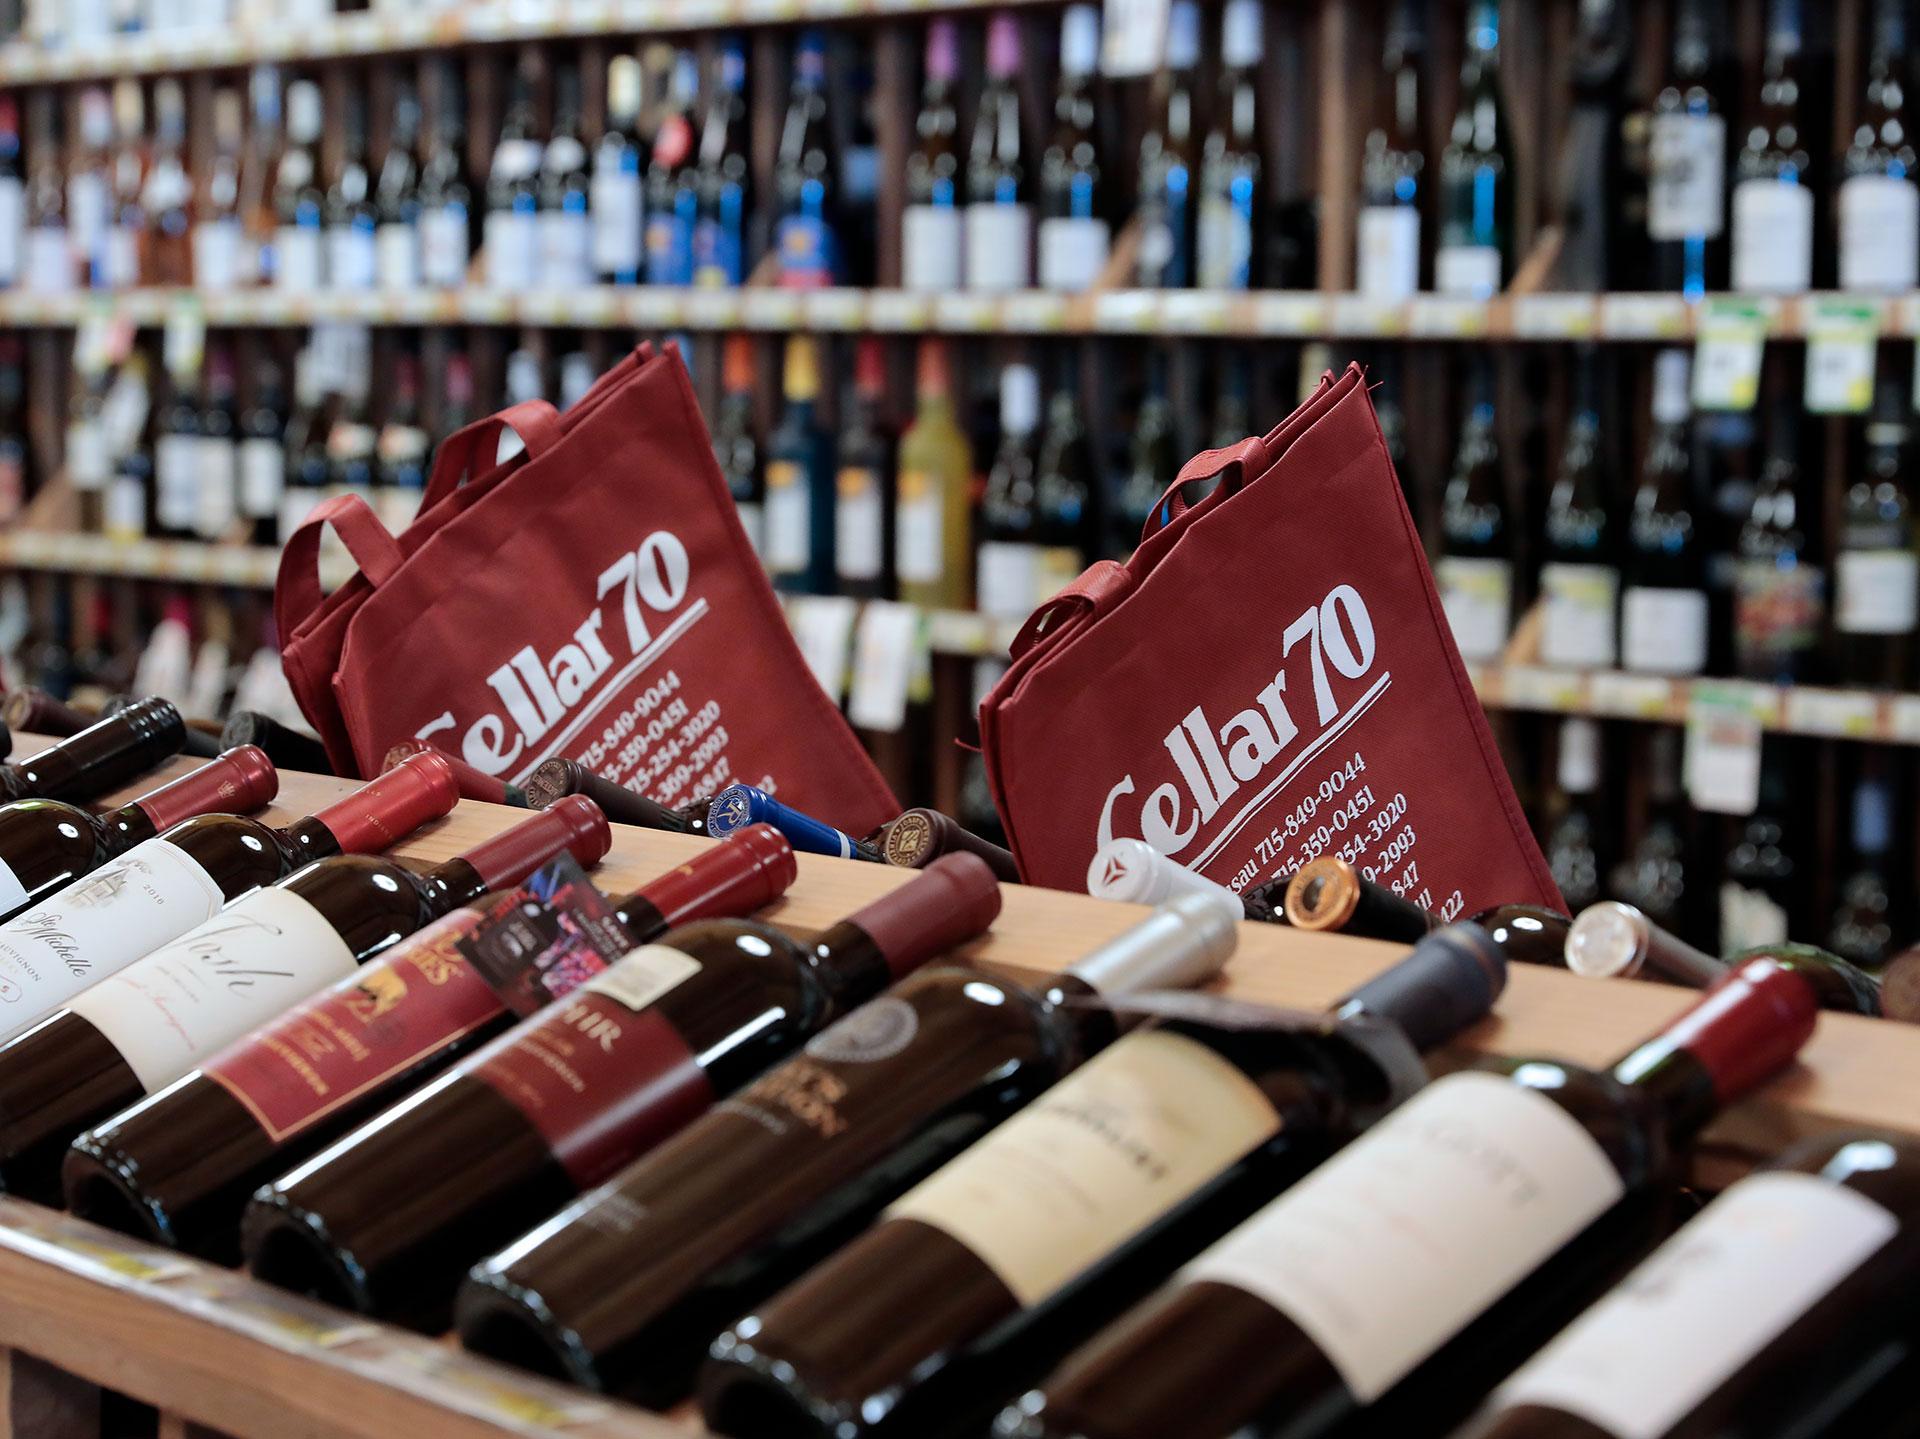 Image of Cellar 70 wine selections - which we make available in-flight per your request.